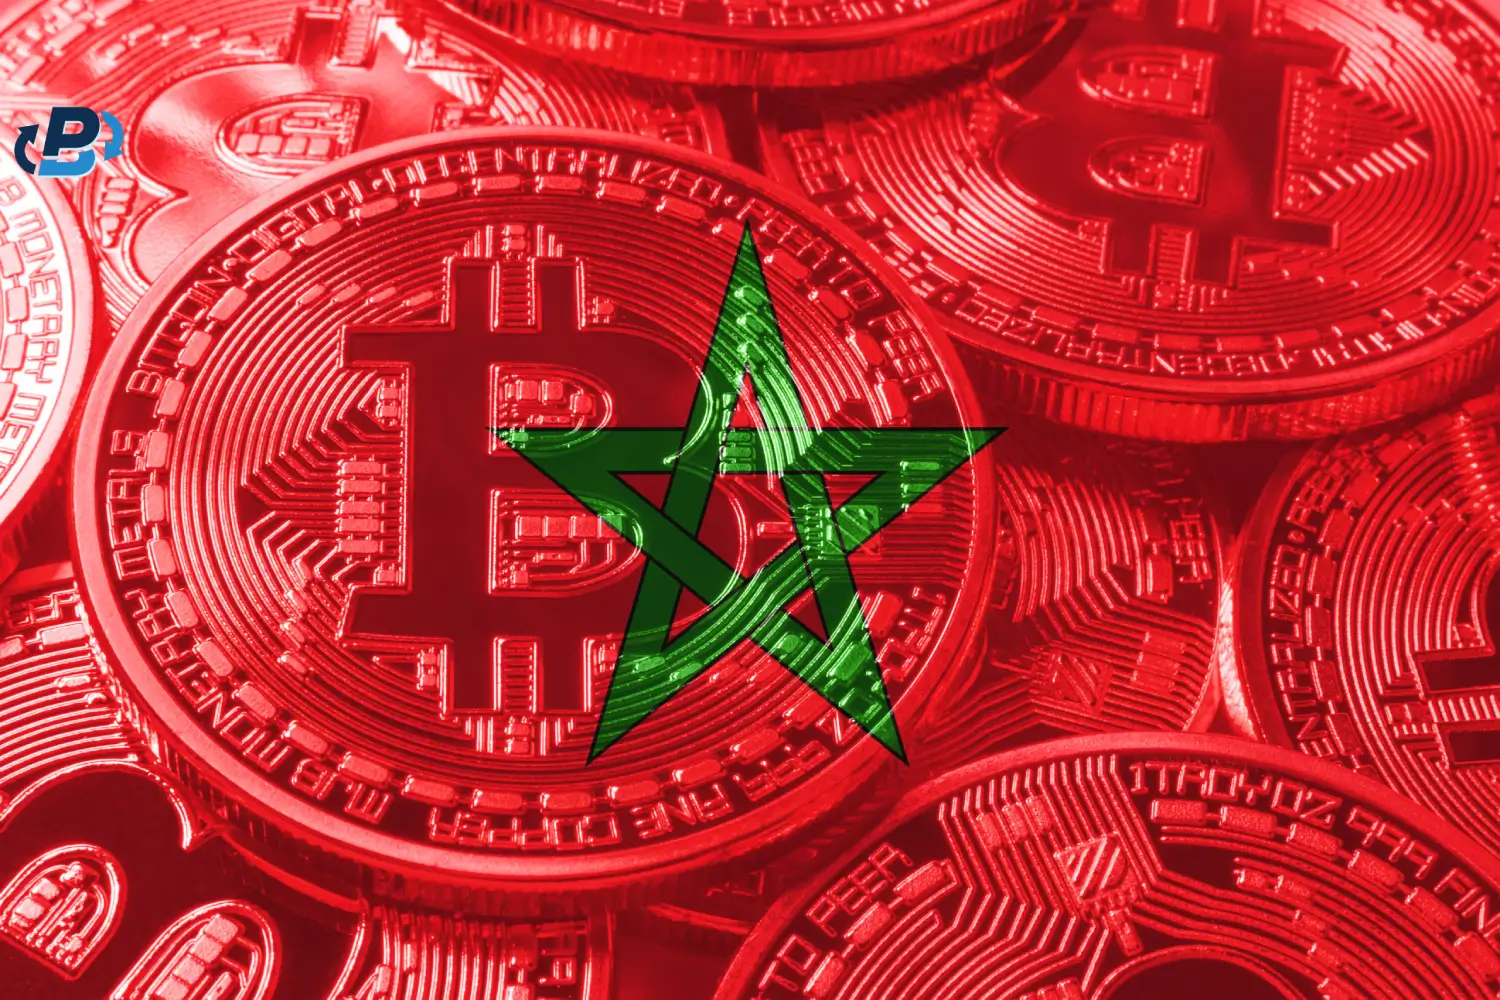 How do I sell Bitcoin in Morocco